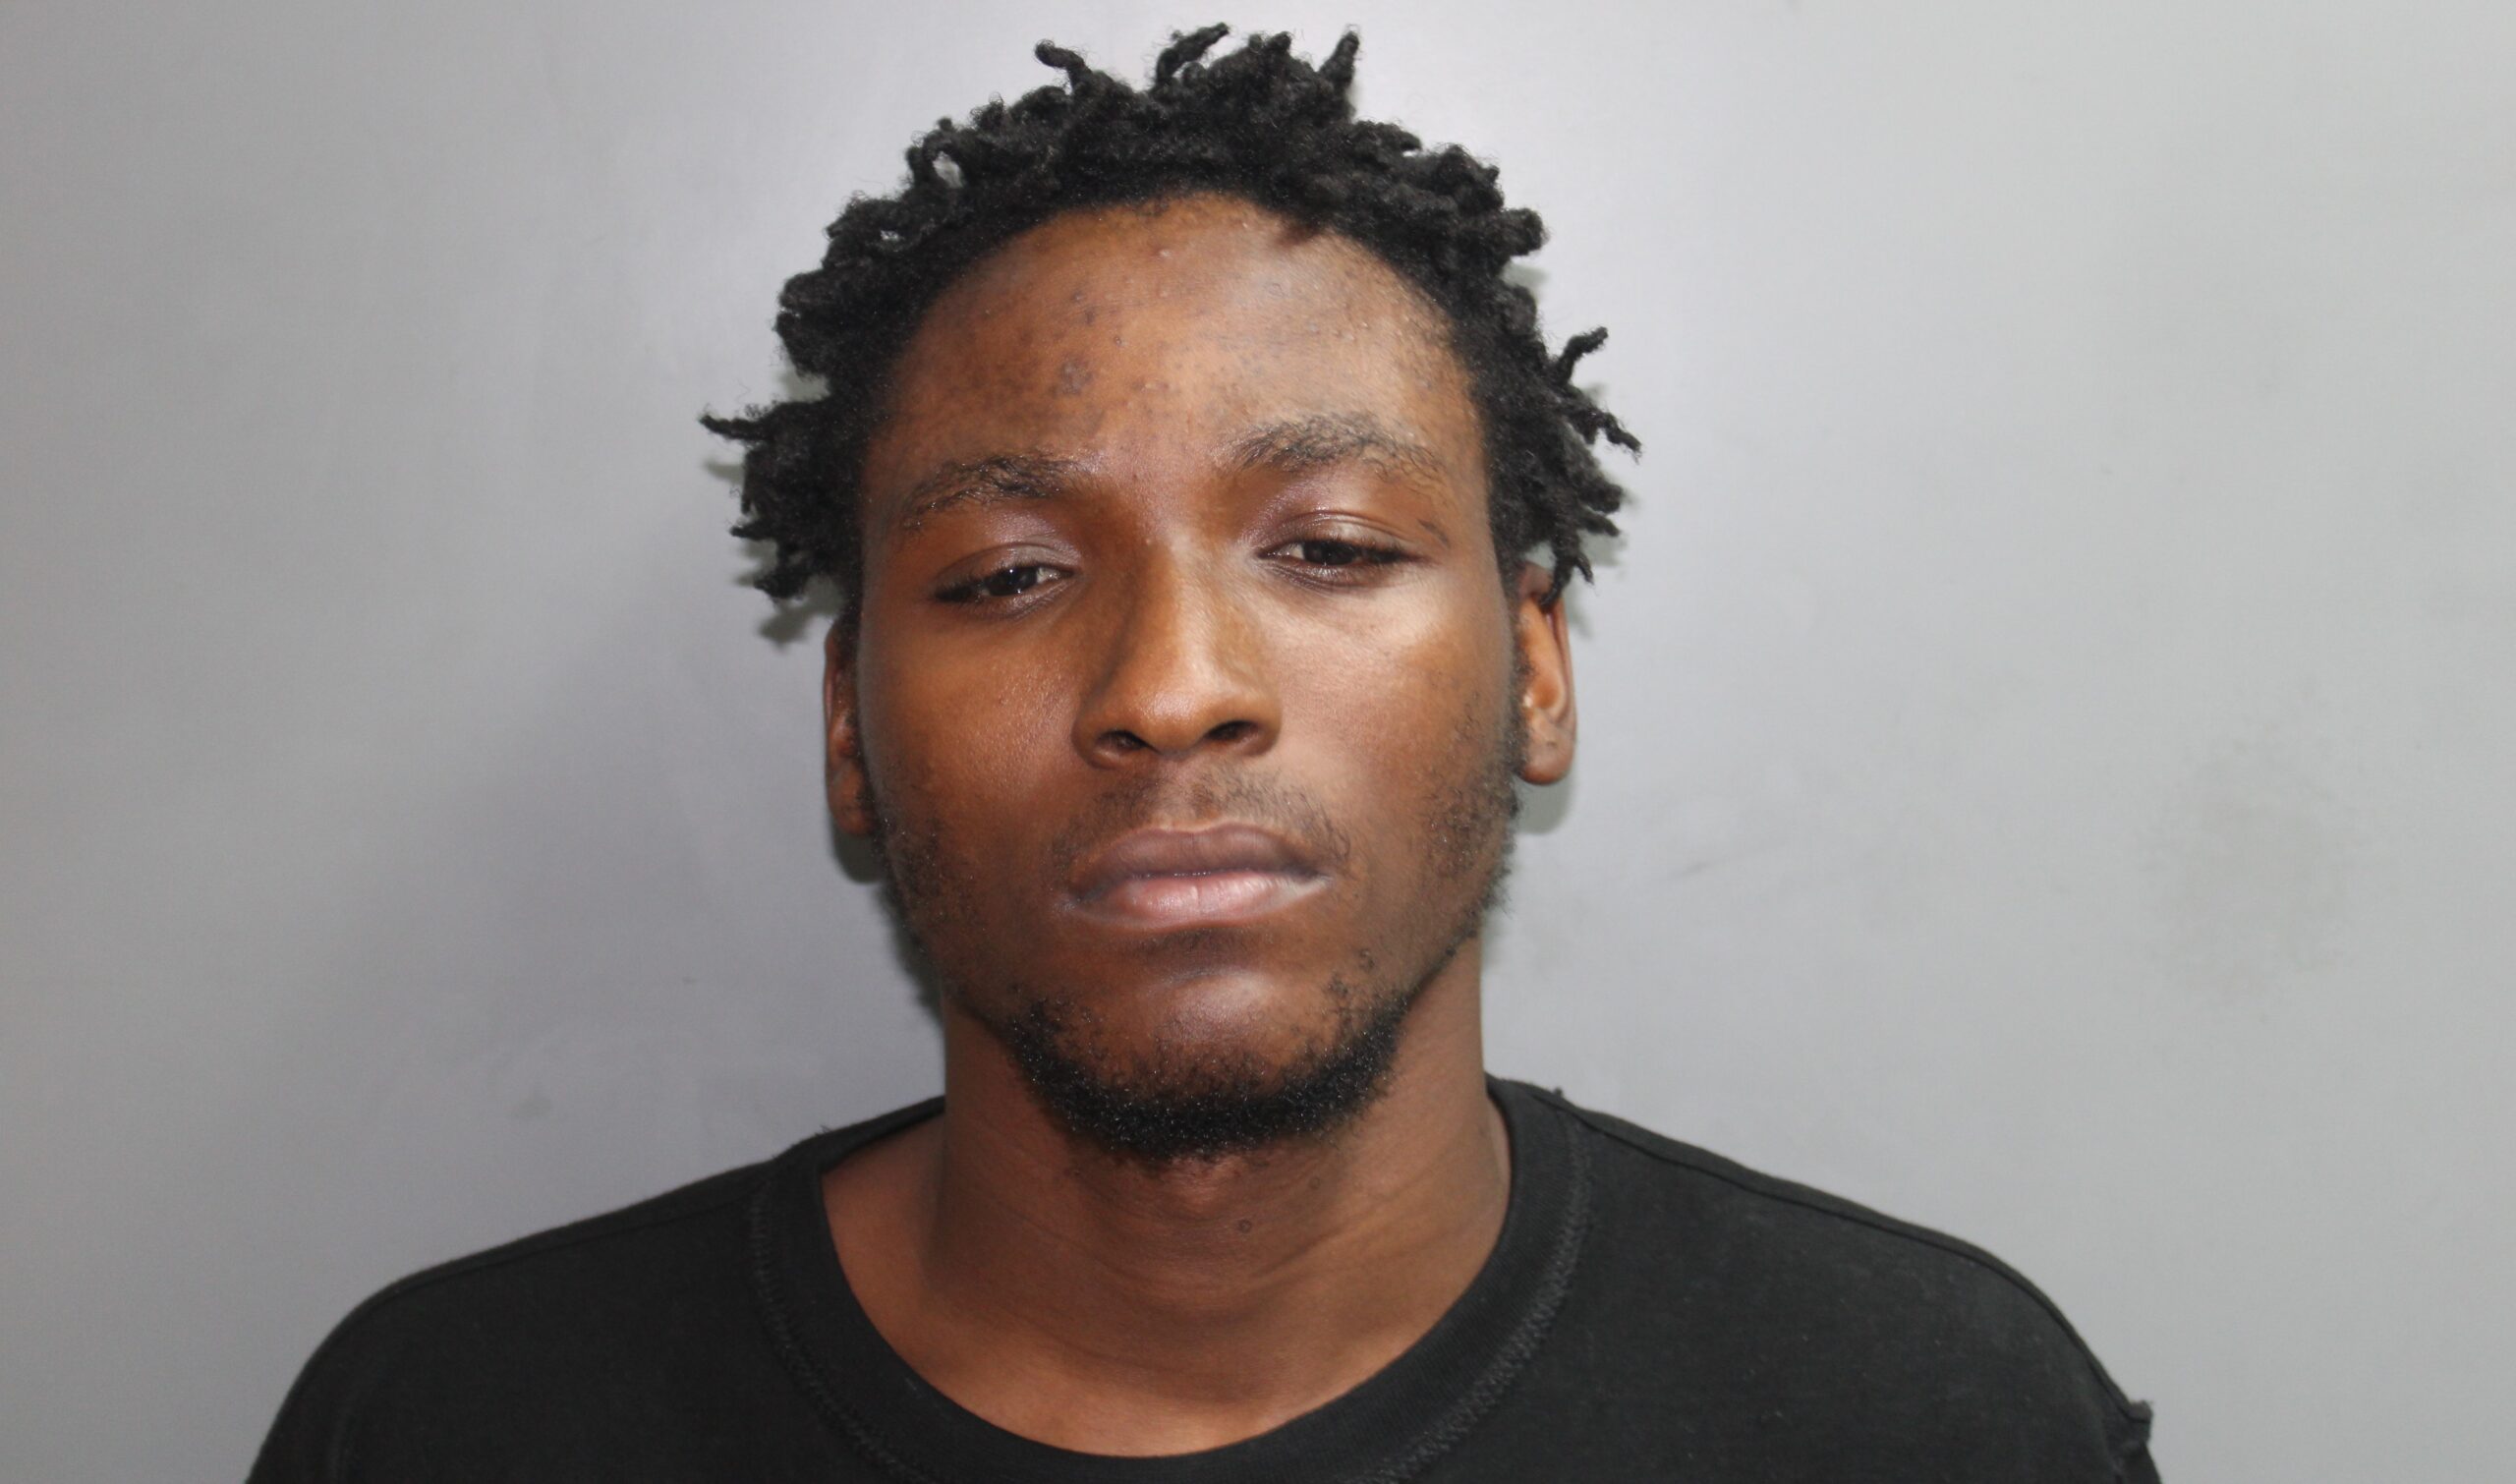 Mount Pleasant West Man Charged With Beating, Raping Girlfriend, VIPD Says